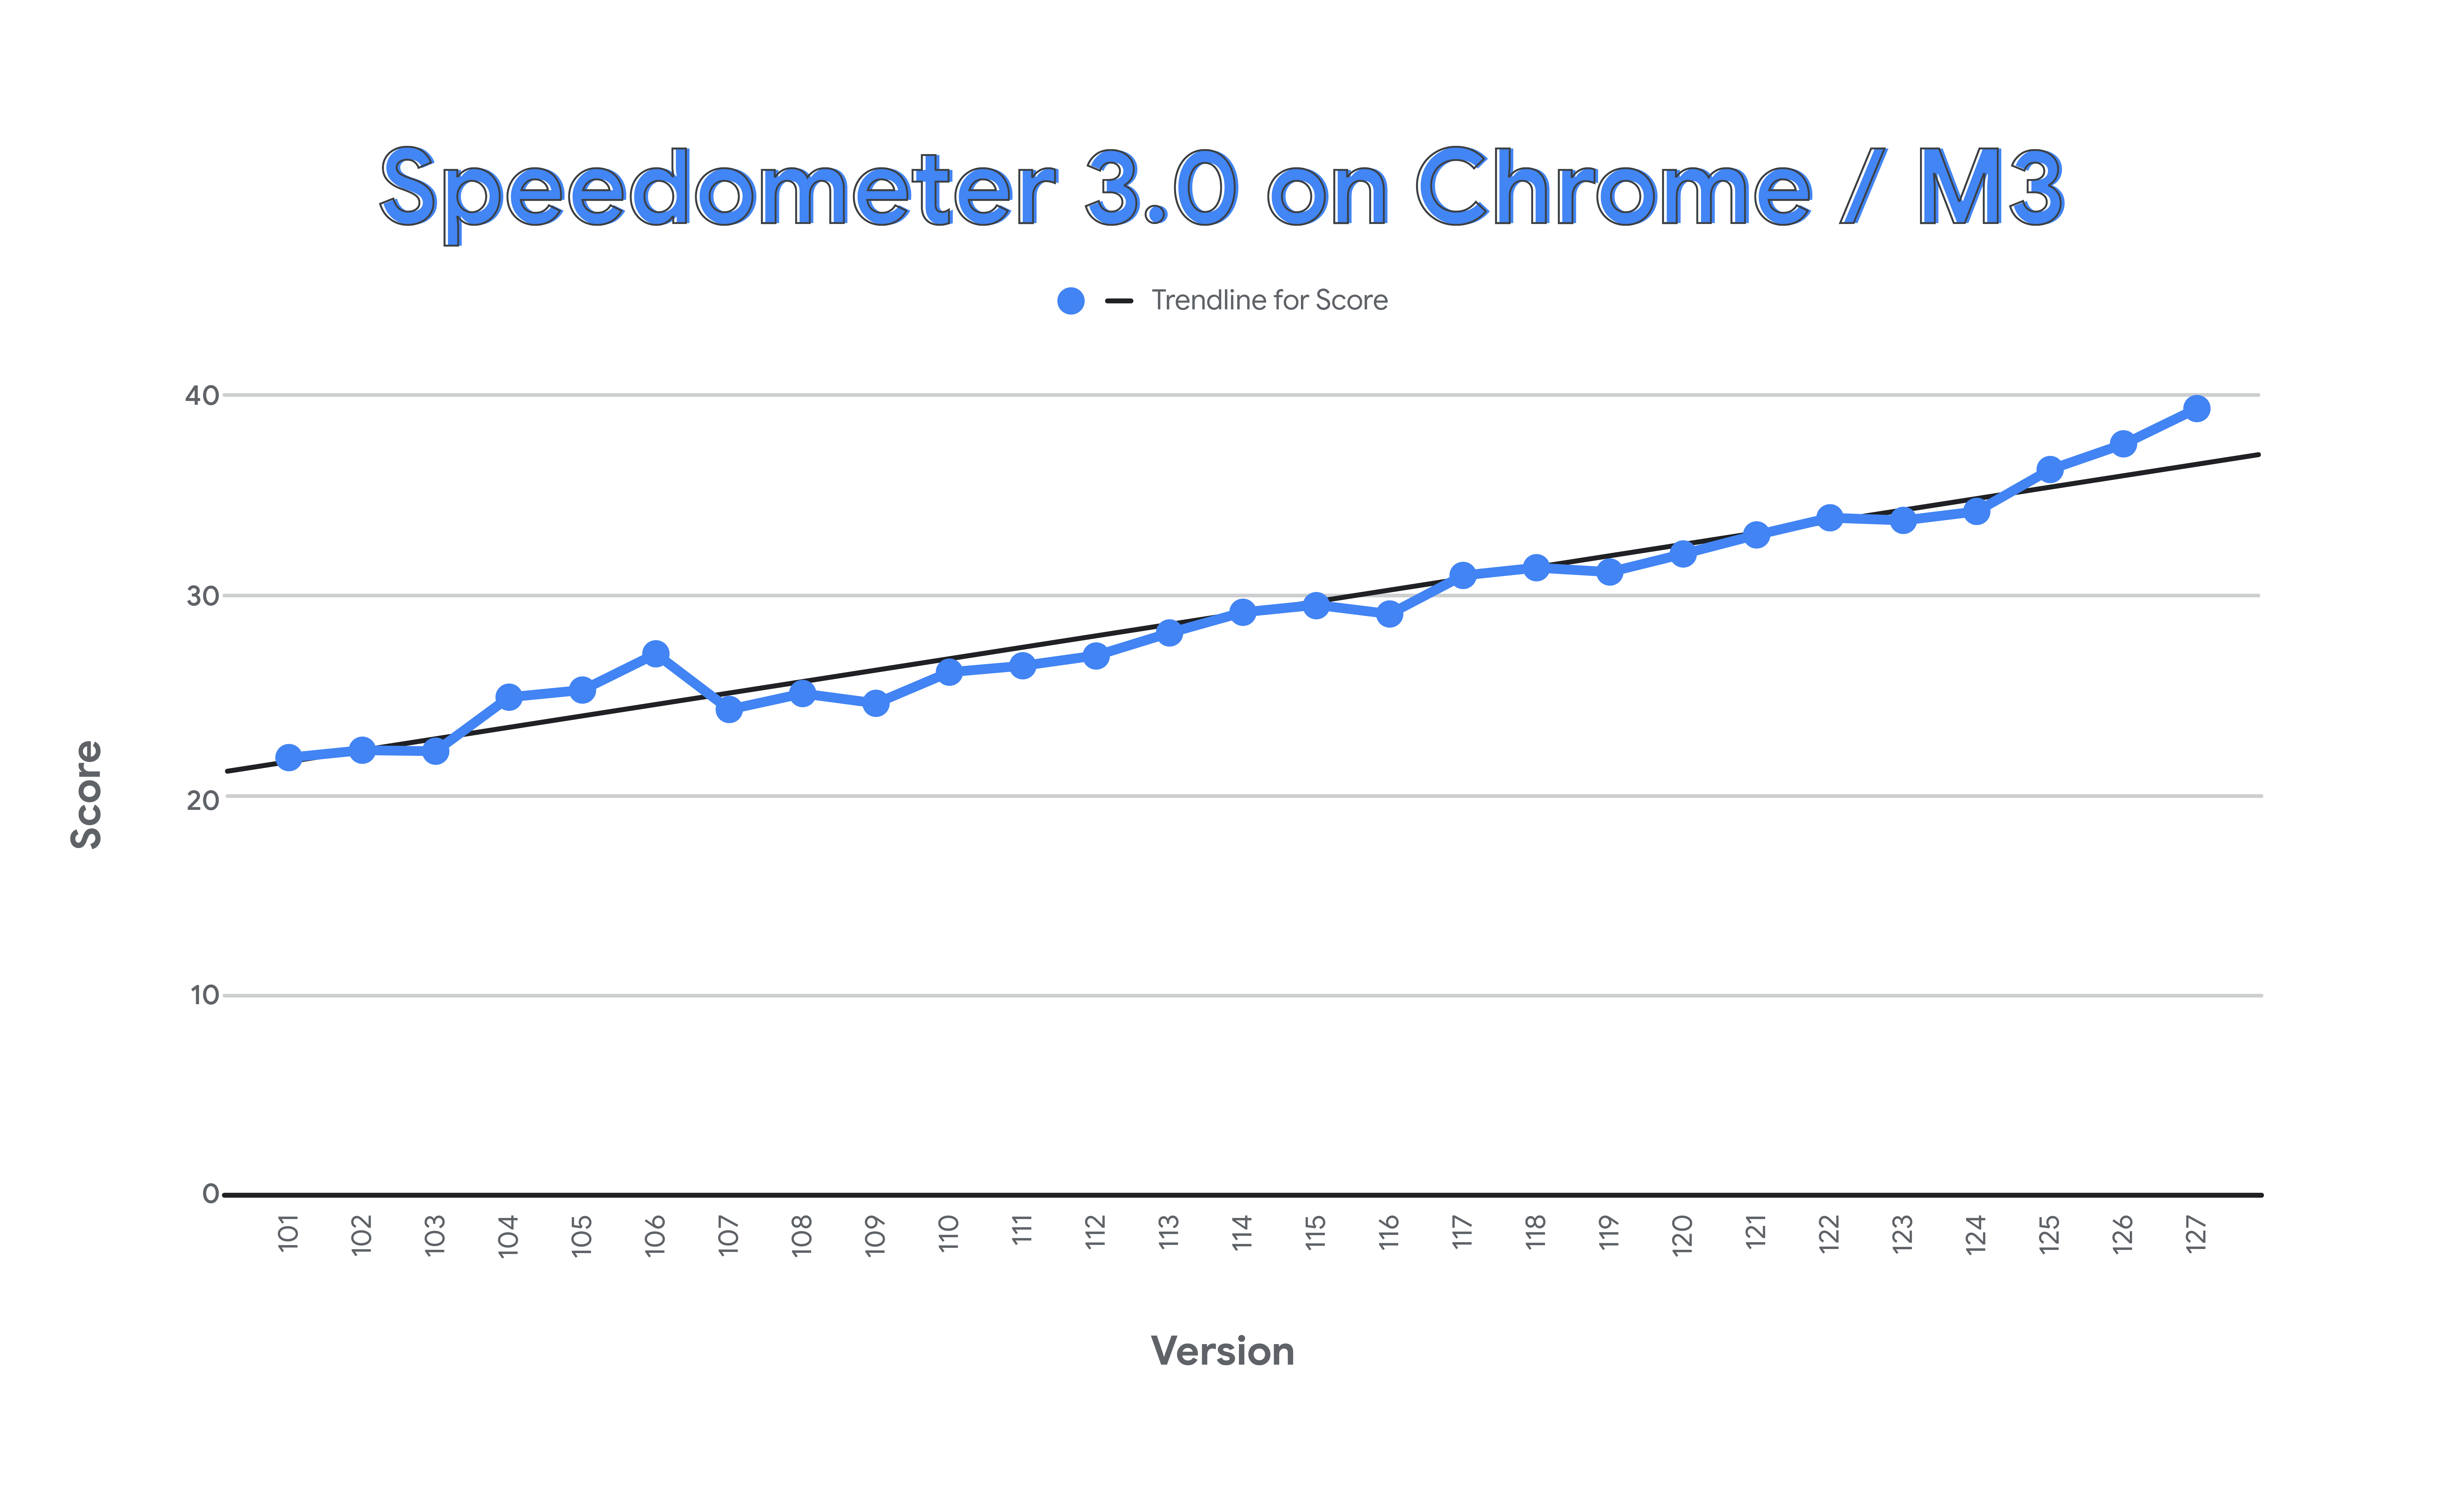 Speedometer 3.0 score evolution over time (Chrome 101 to 127 releases)